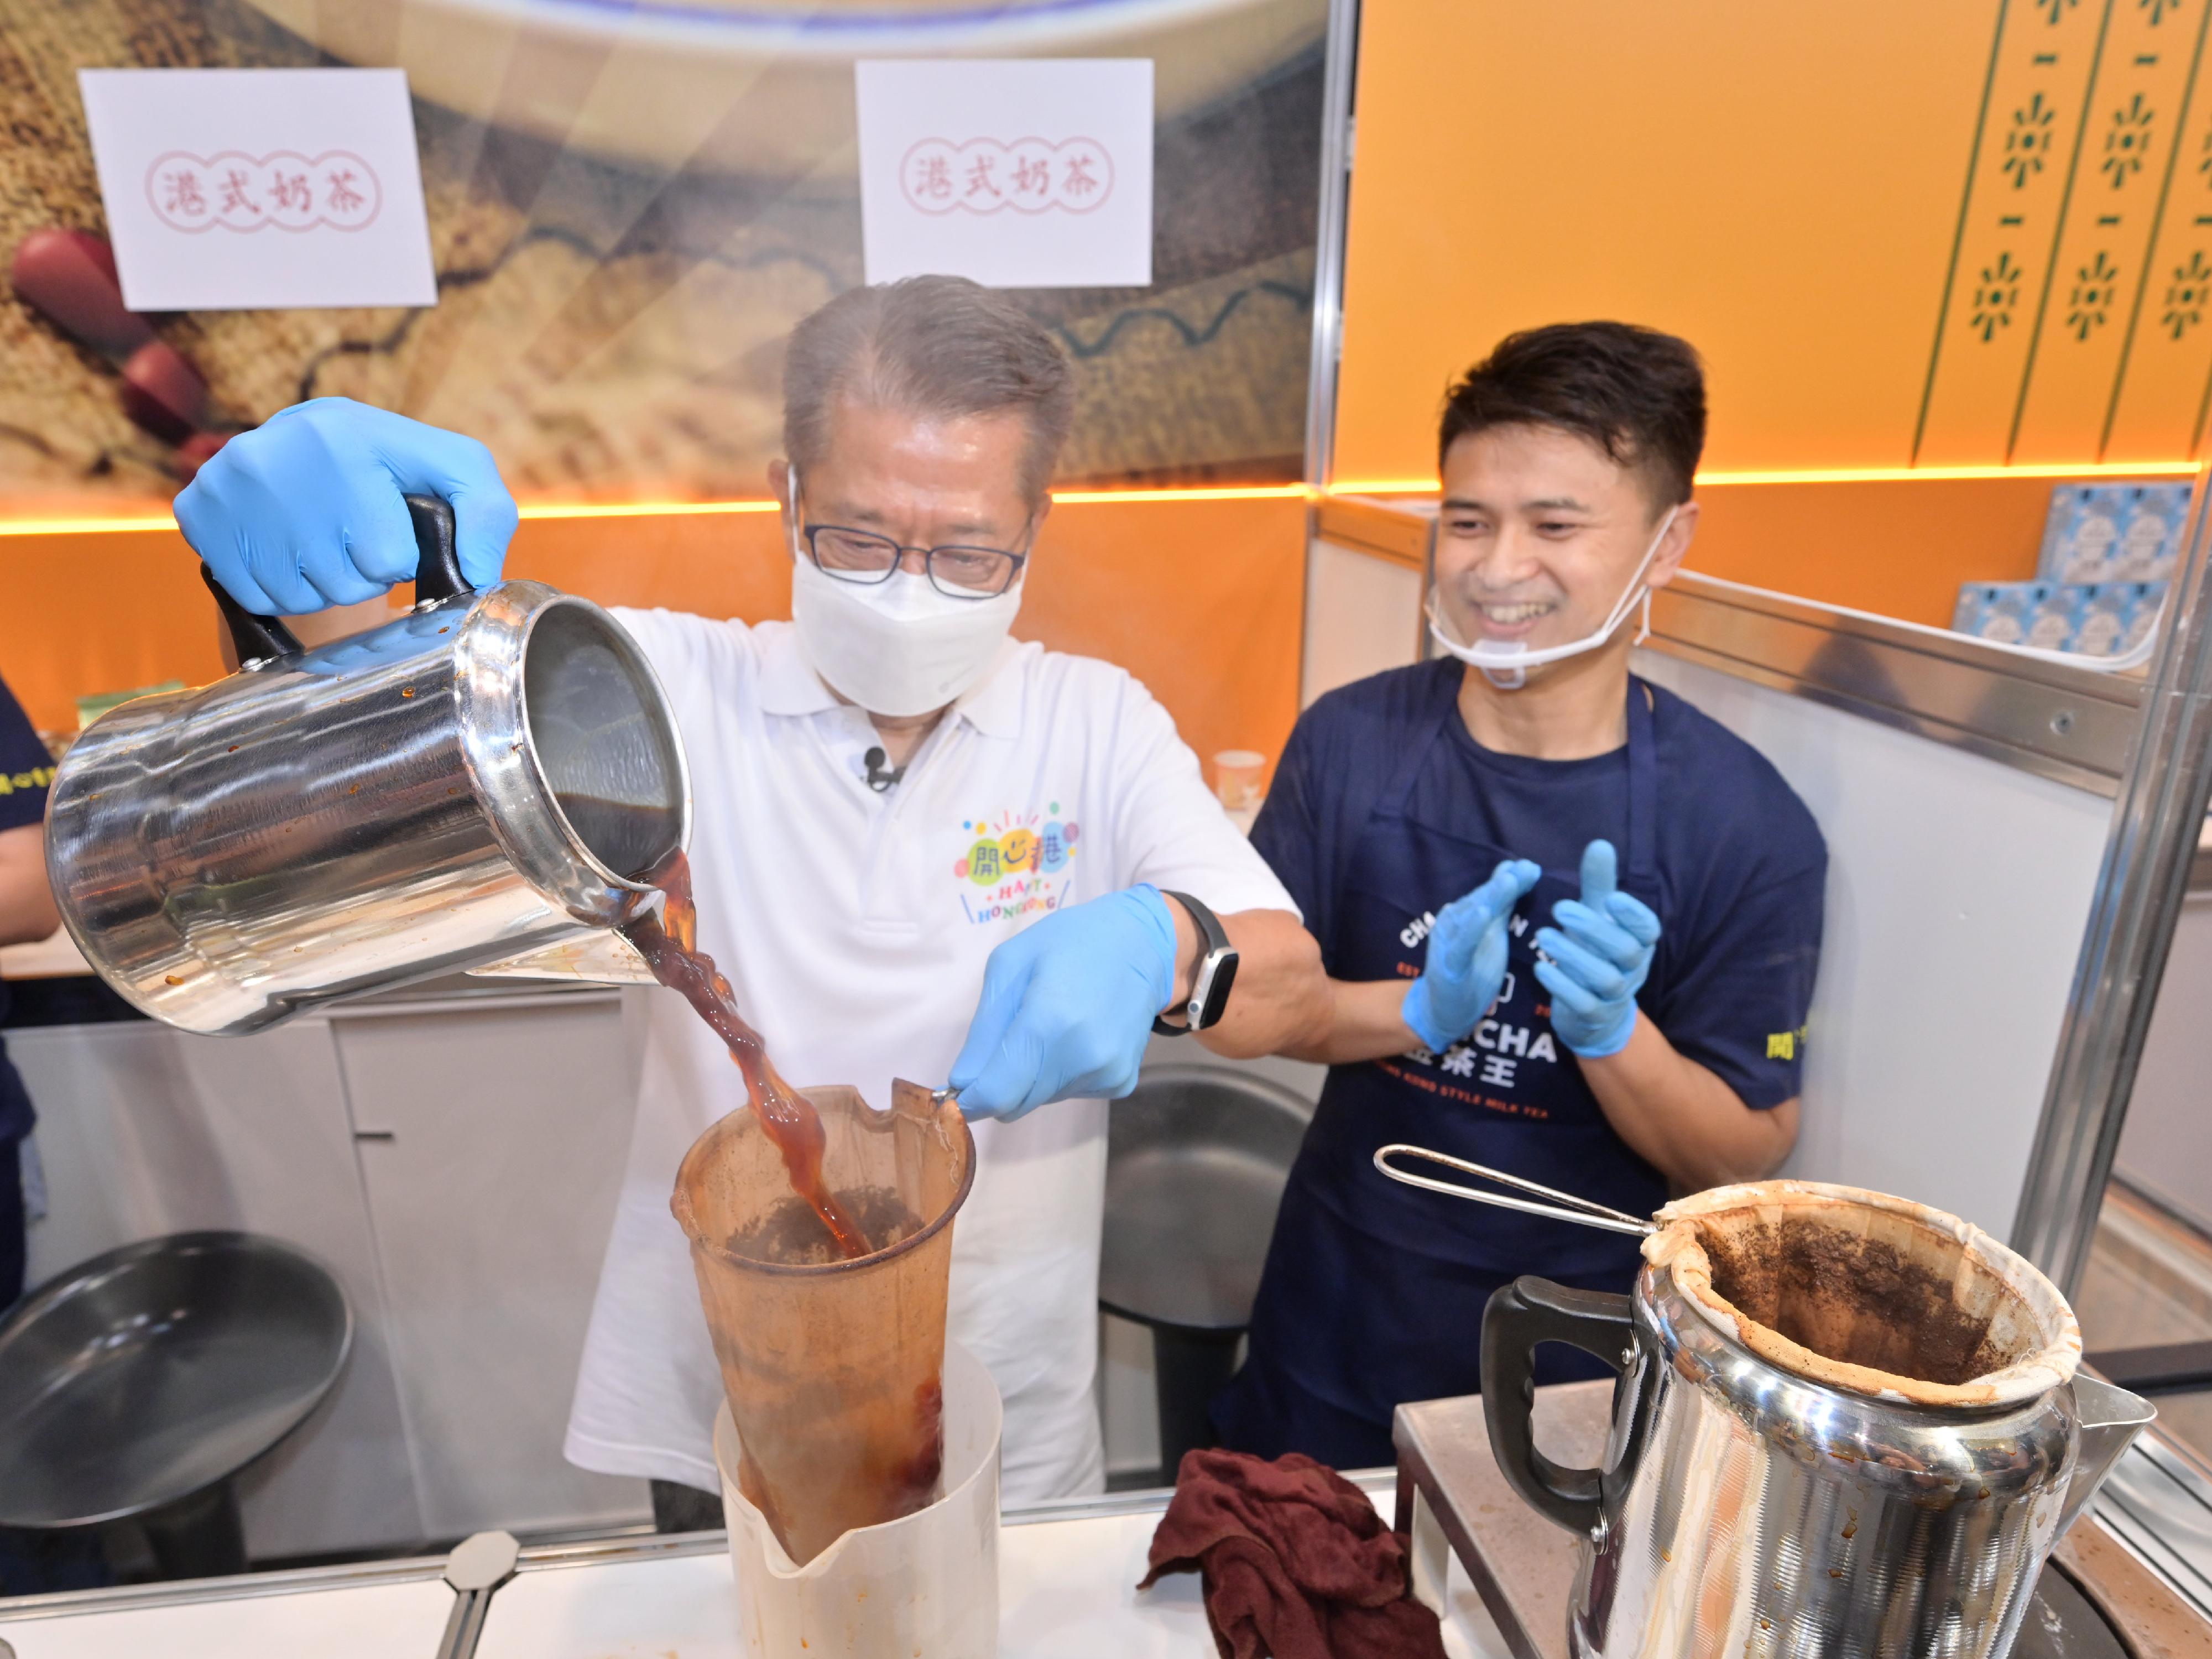 The Financial Secretary, Mr Paul Chan, officiated at the opening ceremony of the first "Happy Hong Kong" Gourmet Marketplace today (April 29). Photo shows Mr Chan (left) preparing milk tea with an exhibitor.